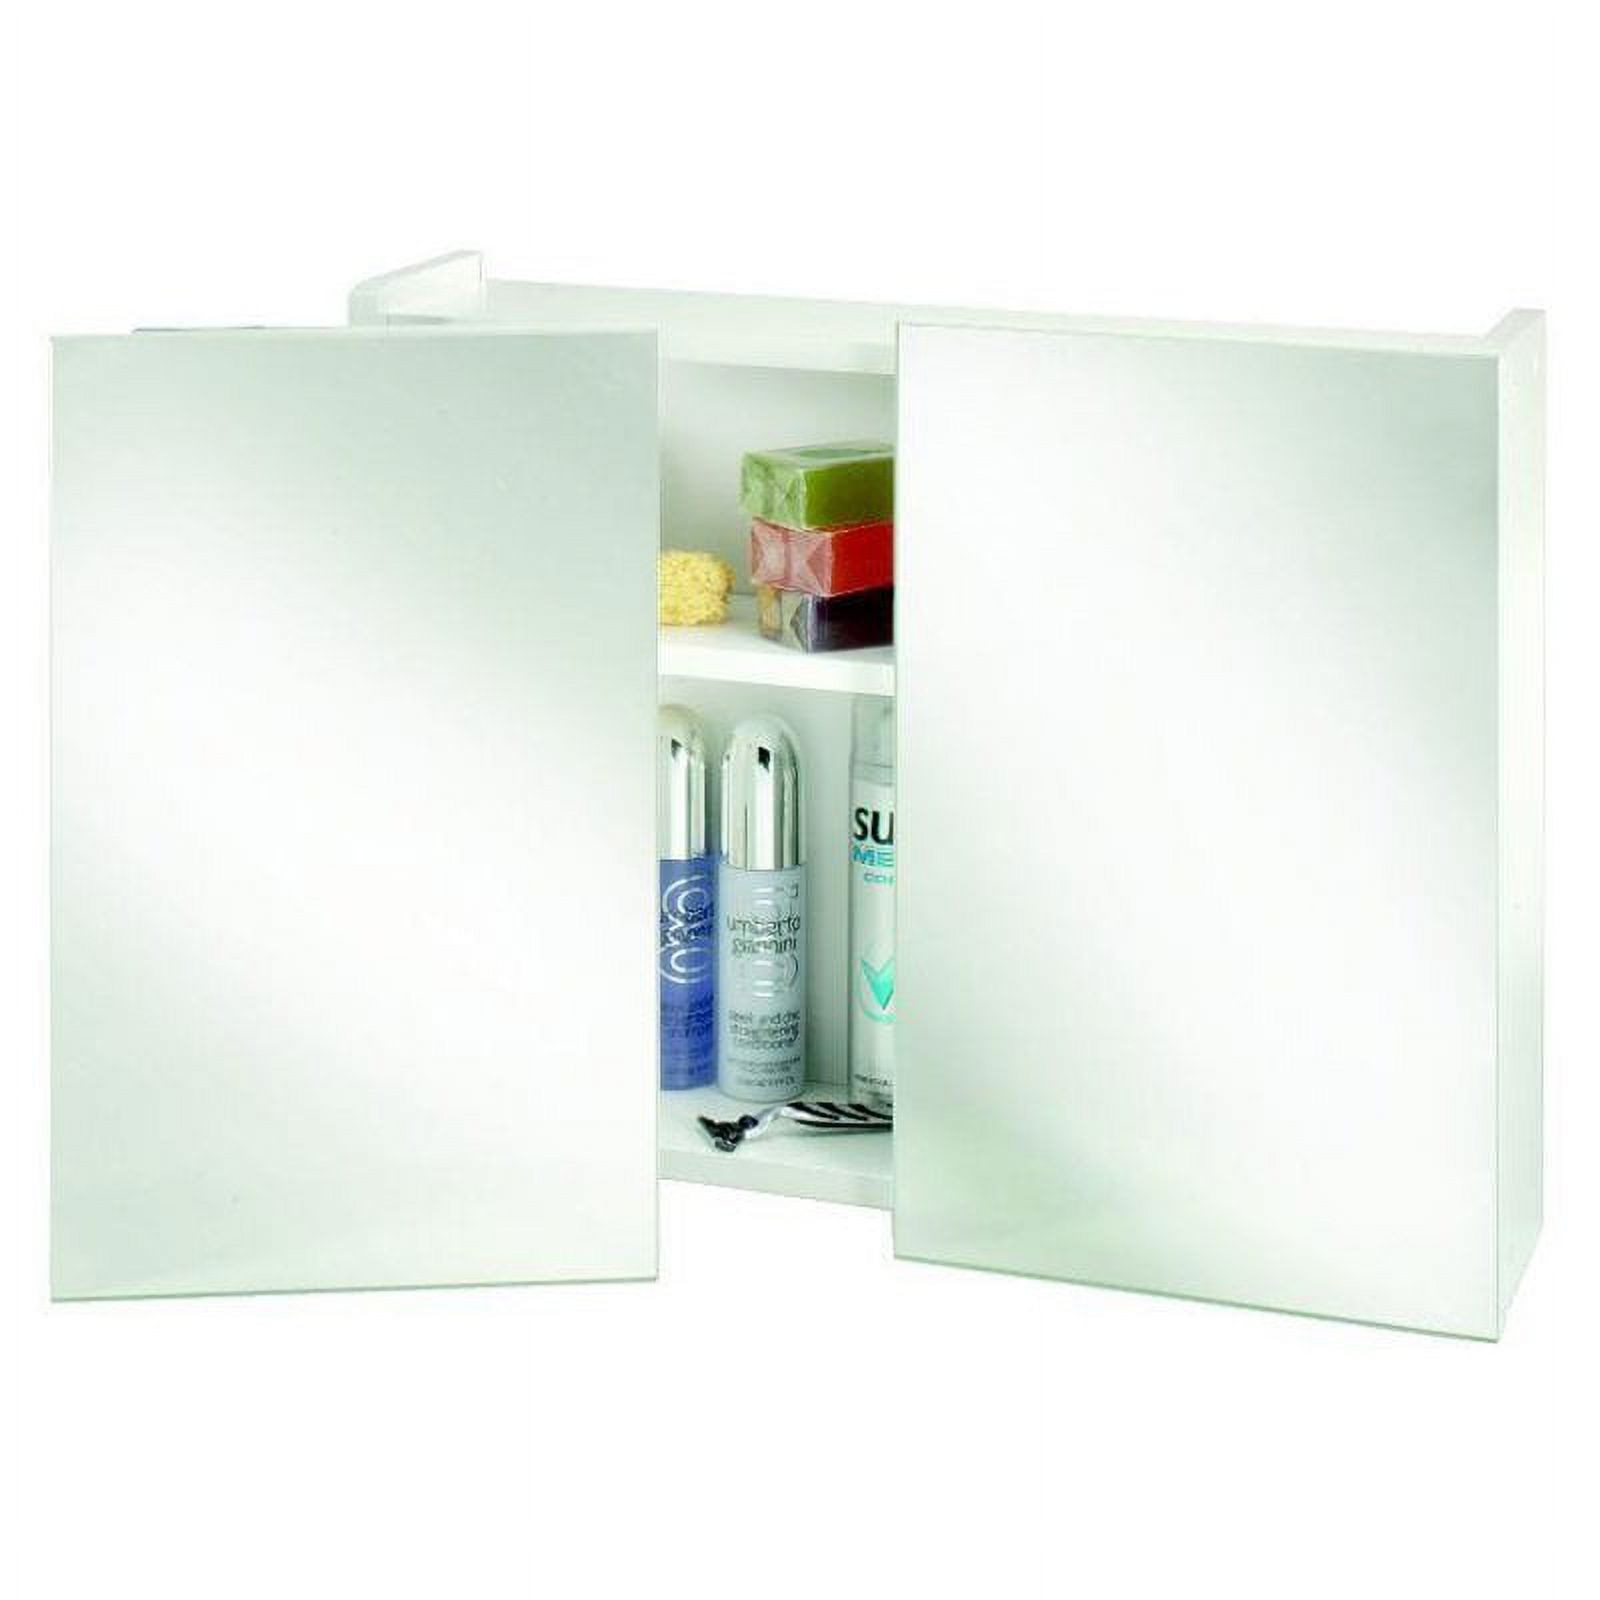 Croydex Swivel Double 23.62W x 18.5H in. Surface Mount Medicine Cabinet - image 1 of 2